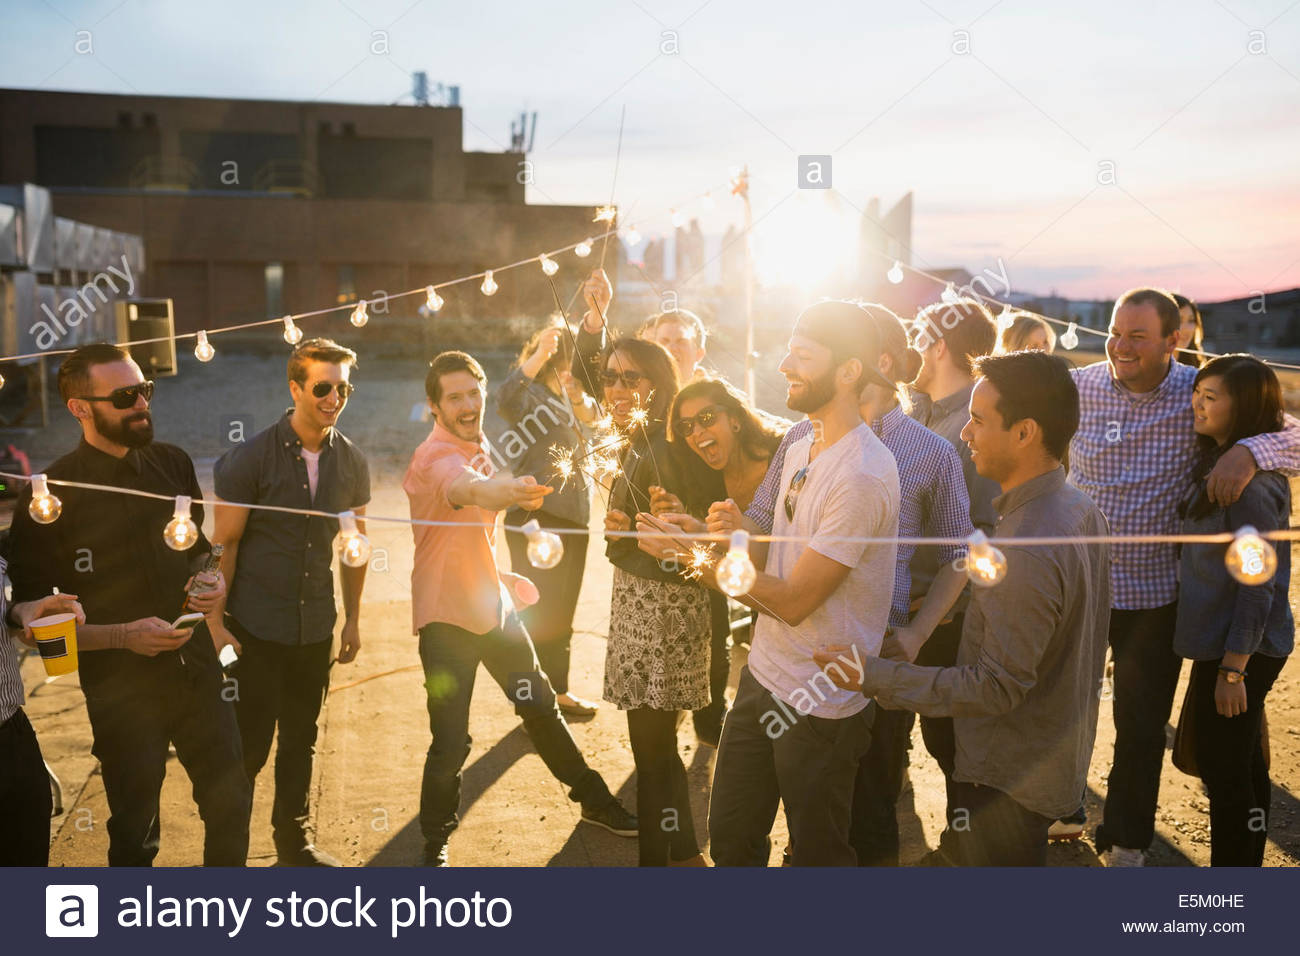 Friends with sparklers enjoying urban rooftop party Stock Photo